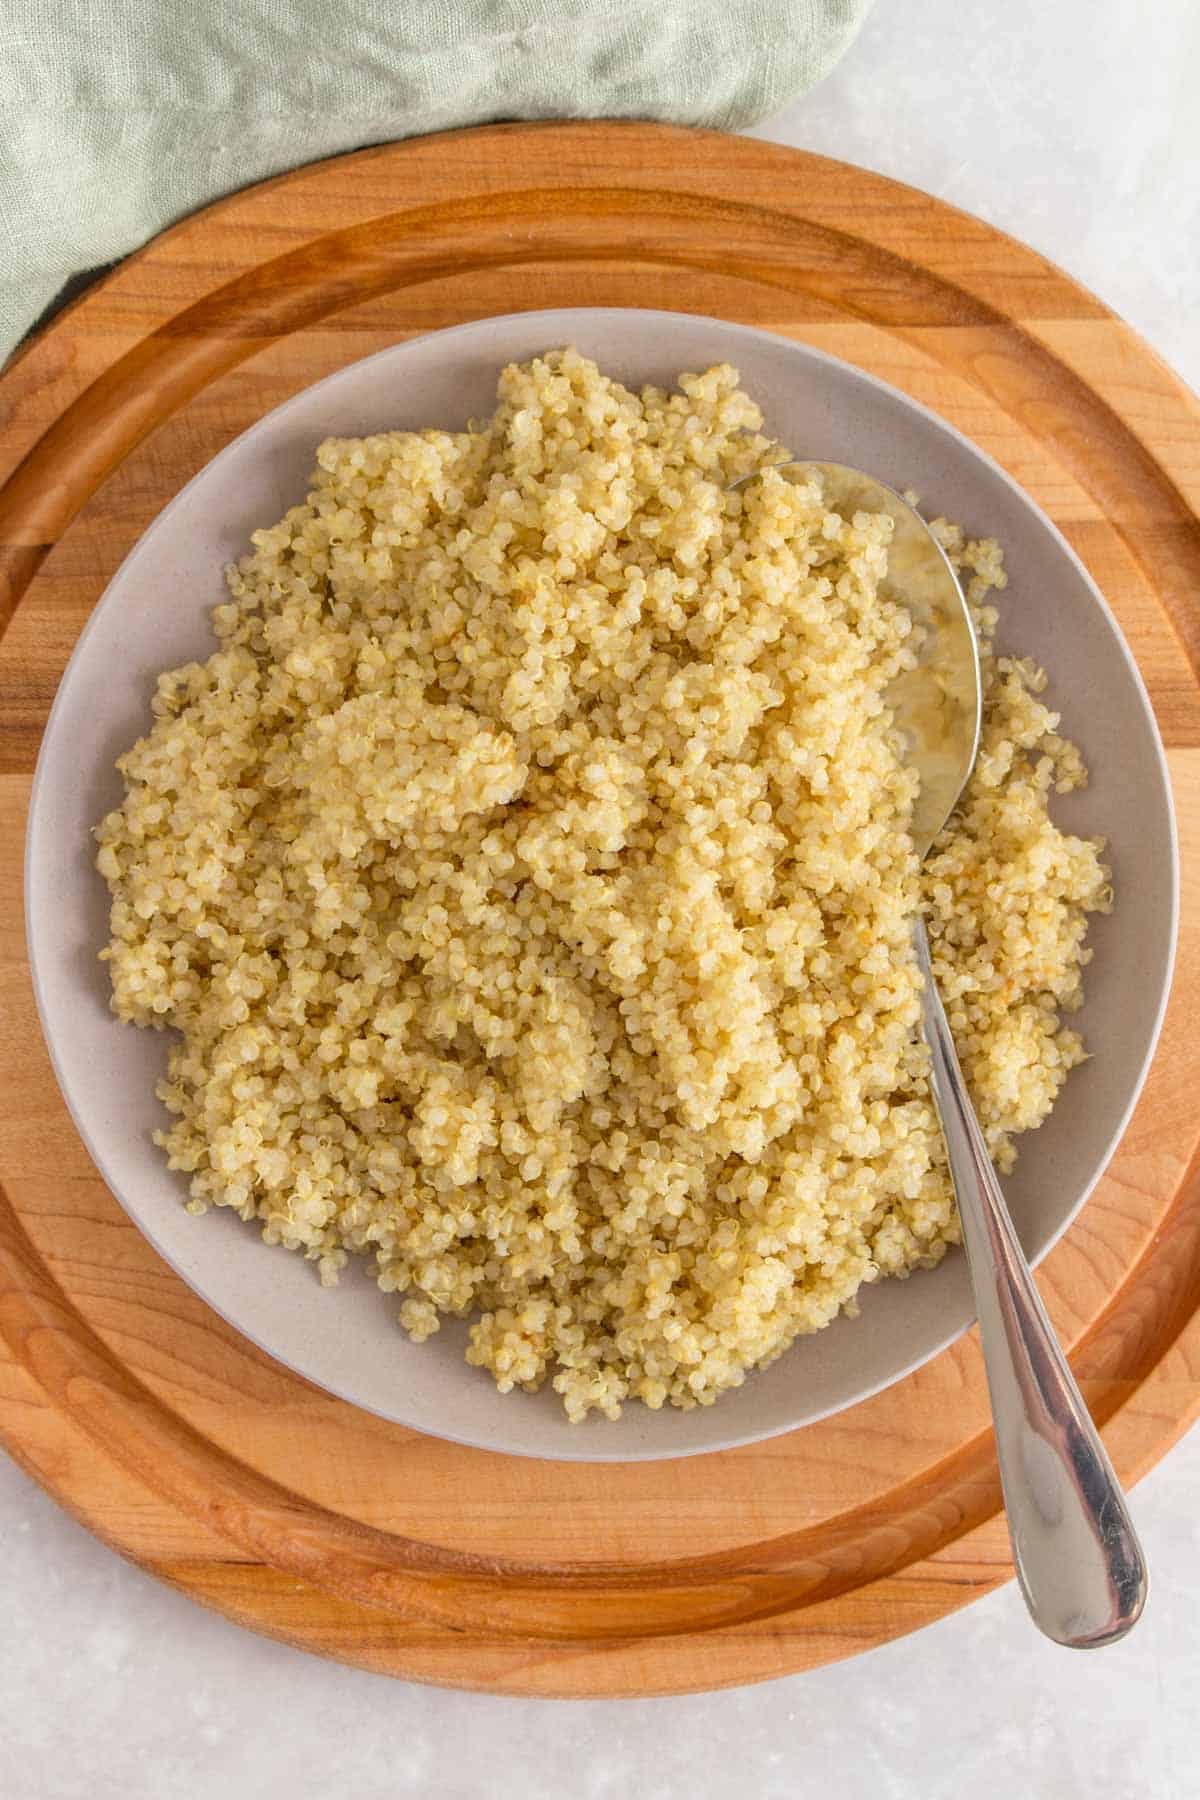 A plate of quinoa with a spoon.